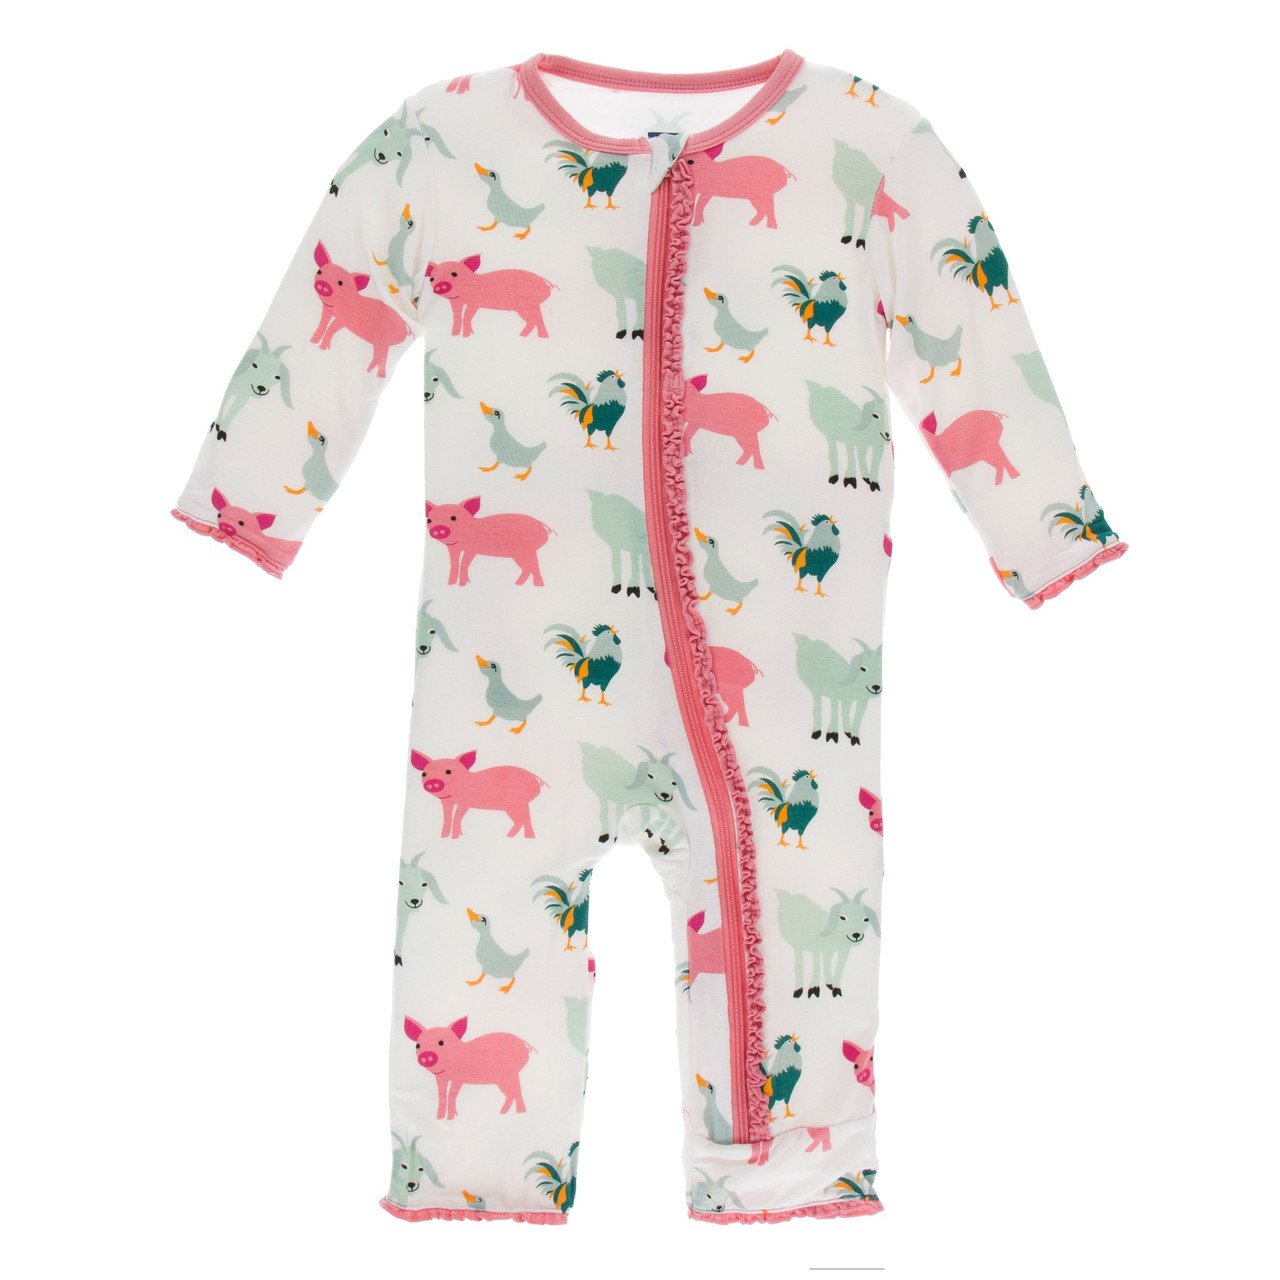 Kickee Pants Natural Farm Animals Infant Ruffle Footie 6-9 Months